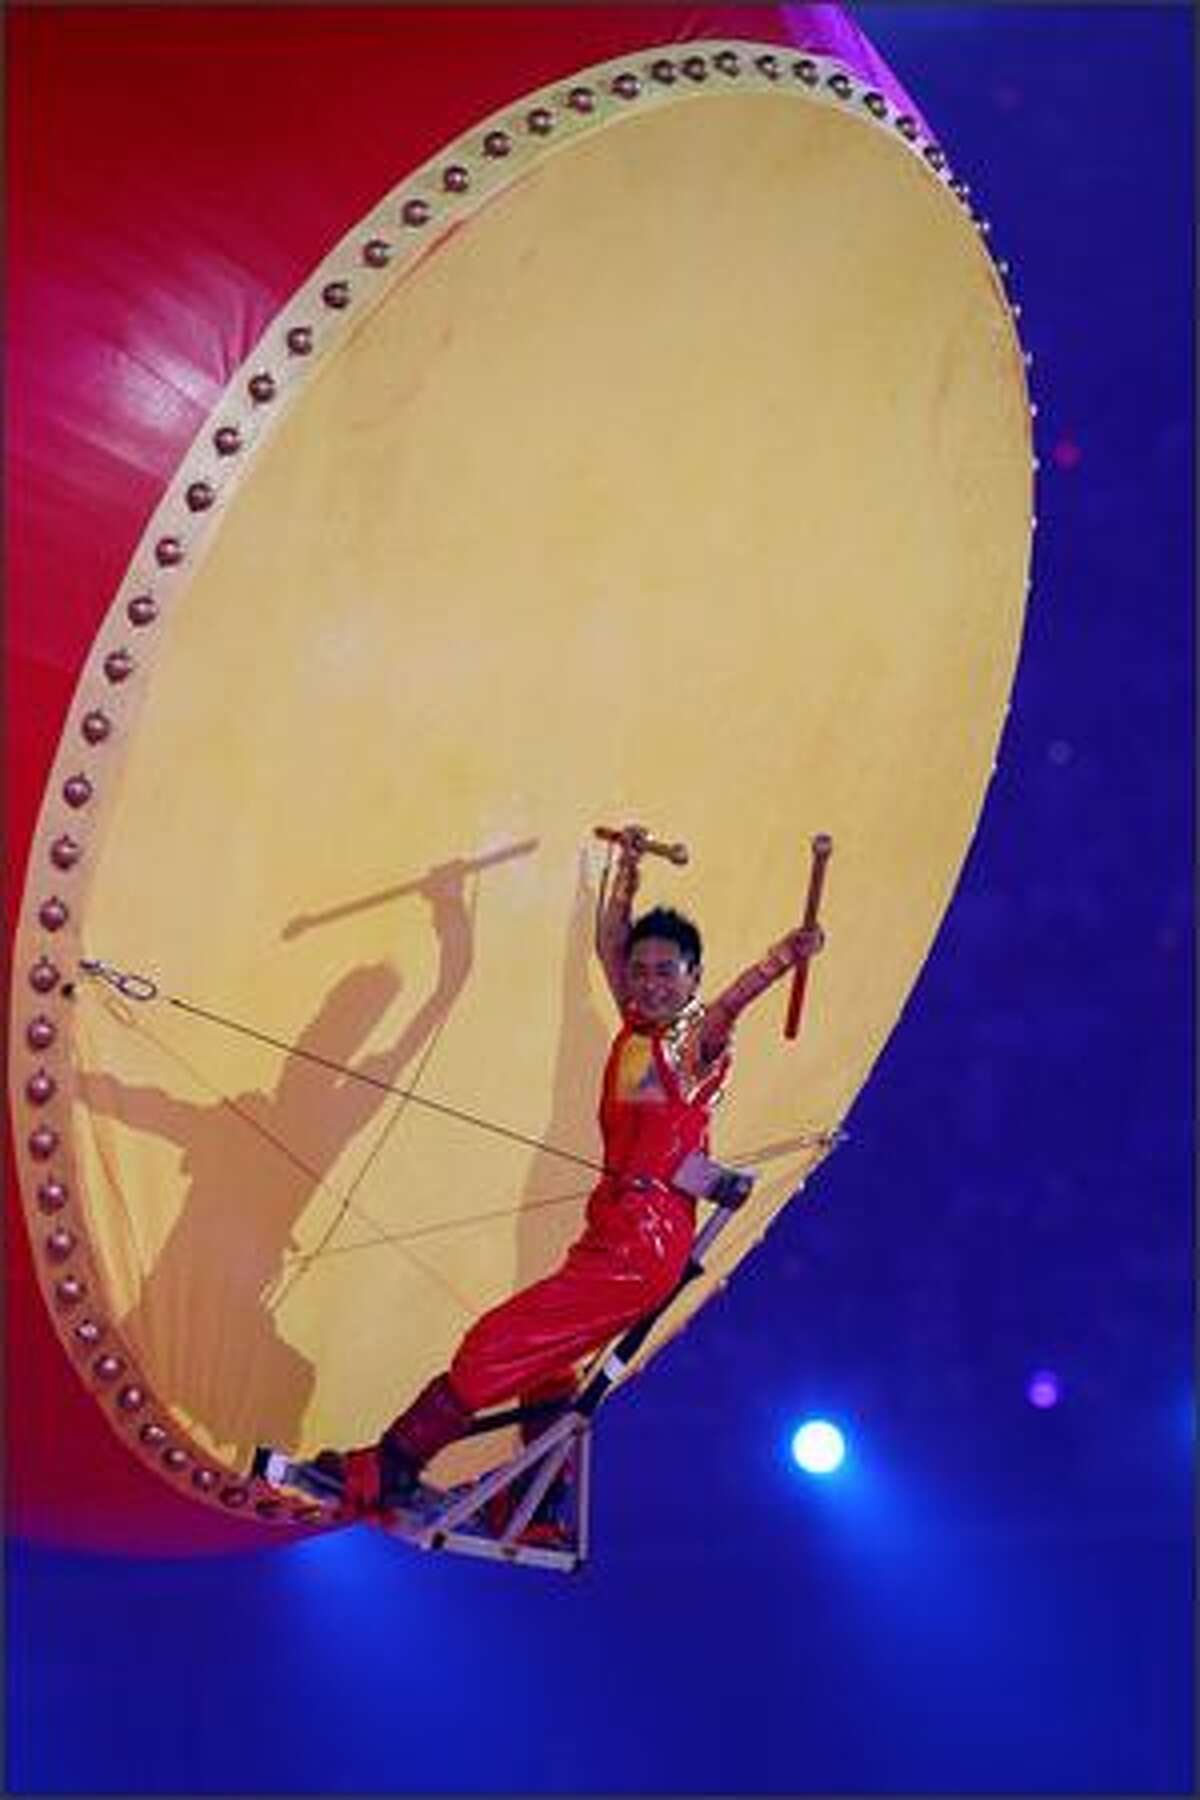 A musician plays a giant drum during the Closing Ceremony for the Beijing 2008 Olympic Games on Sunday in Beijing.